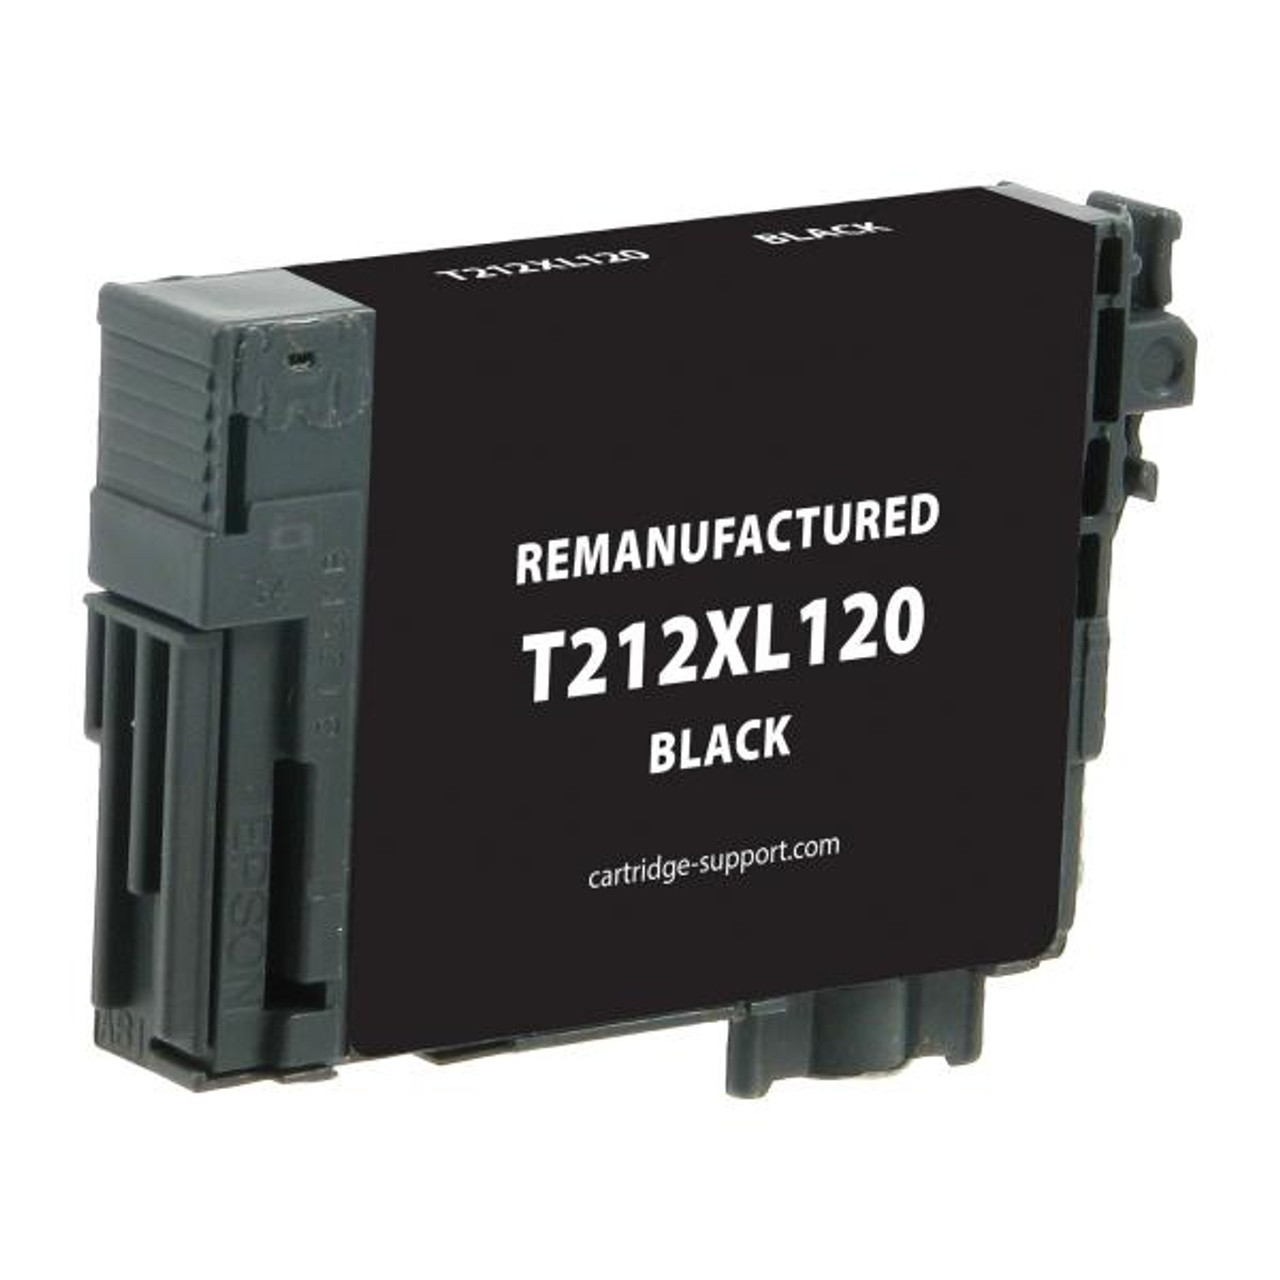 High Capacity Black Ink Cartridge for Epson T212XL120-1